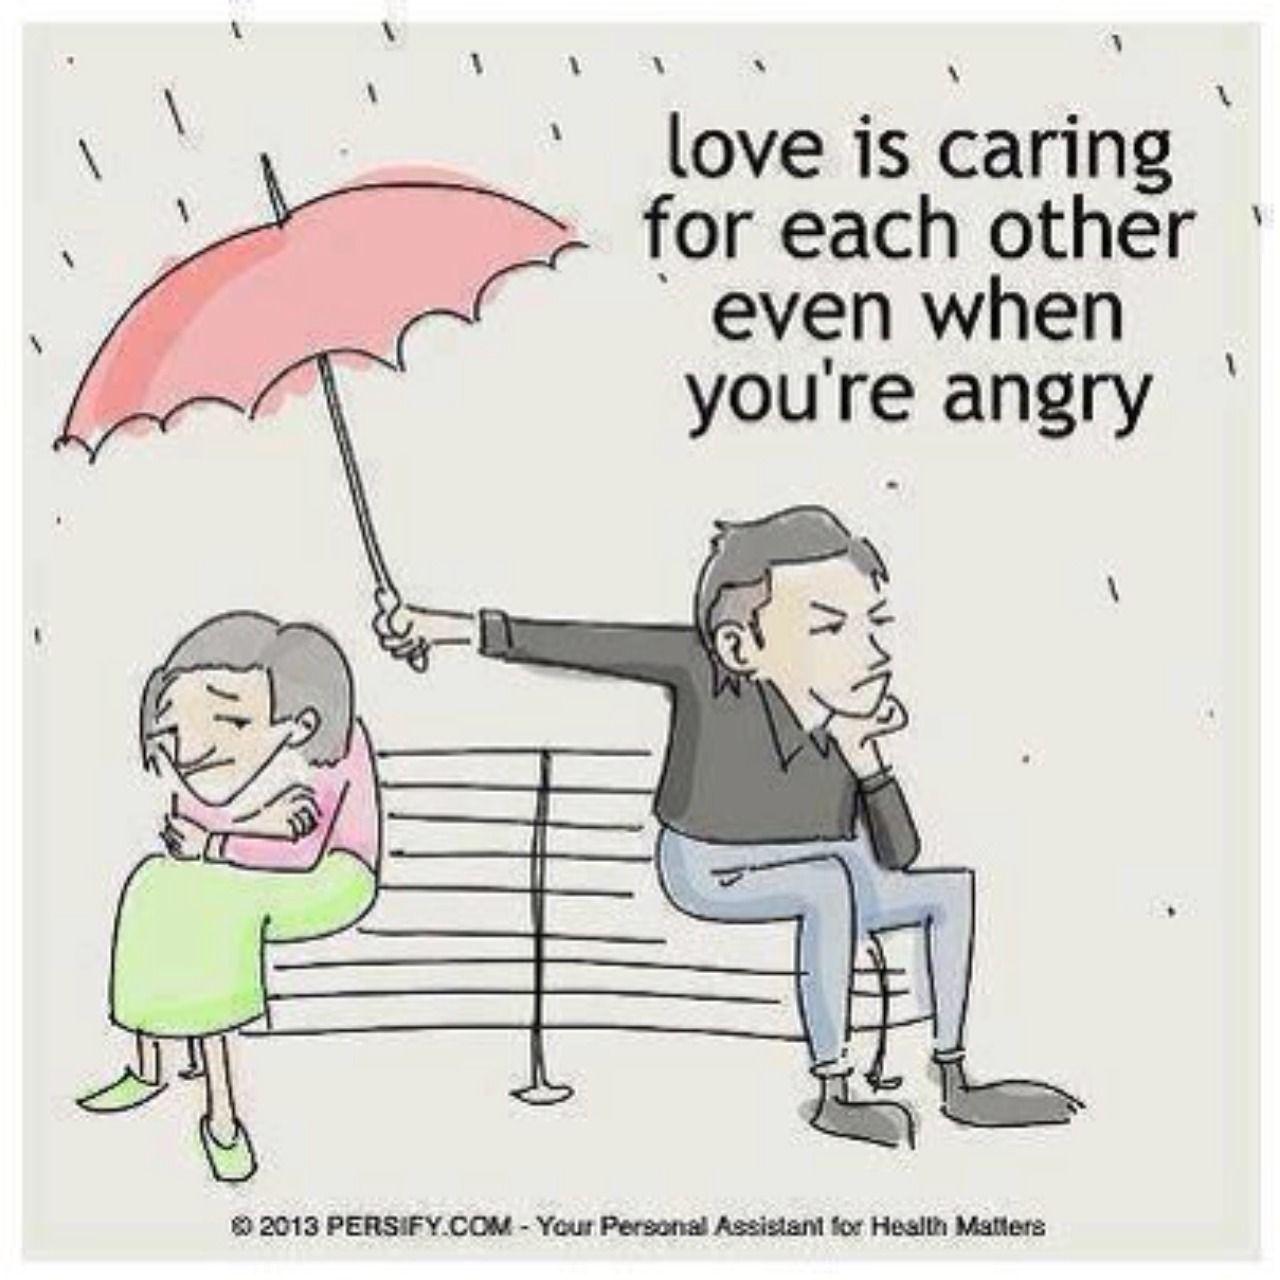 Wallpaper Quotes About Angry In Love With Is Caring Even When You